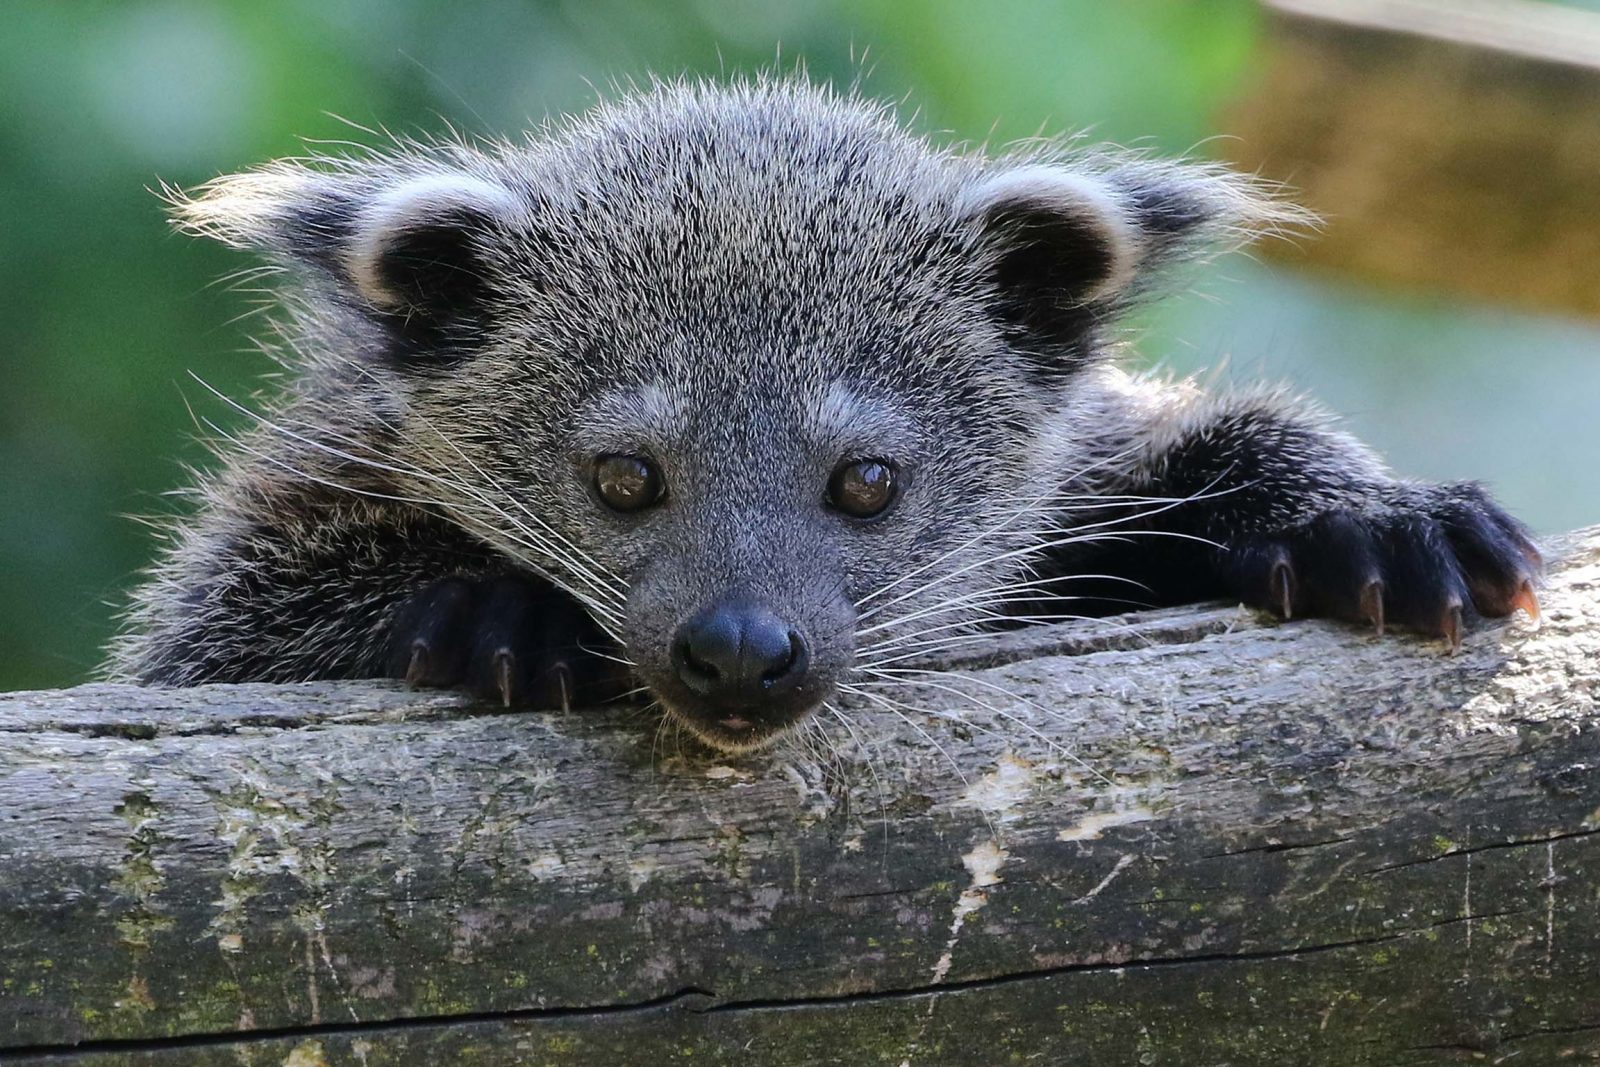 If You Can Pass This General Knowledge Test on Your First Try, You’re Undoubtedly Way Too Smart Binturong